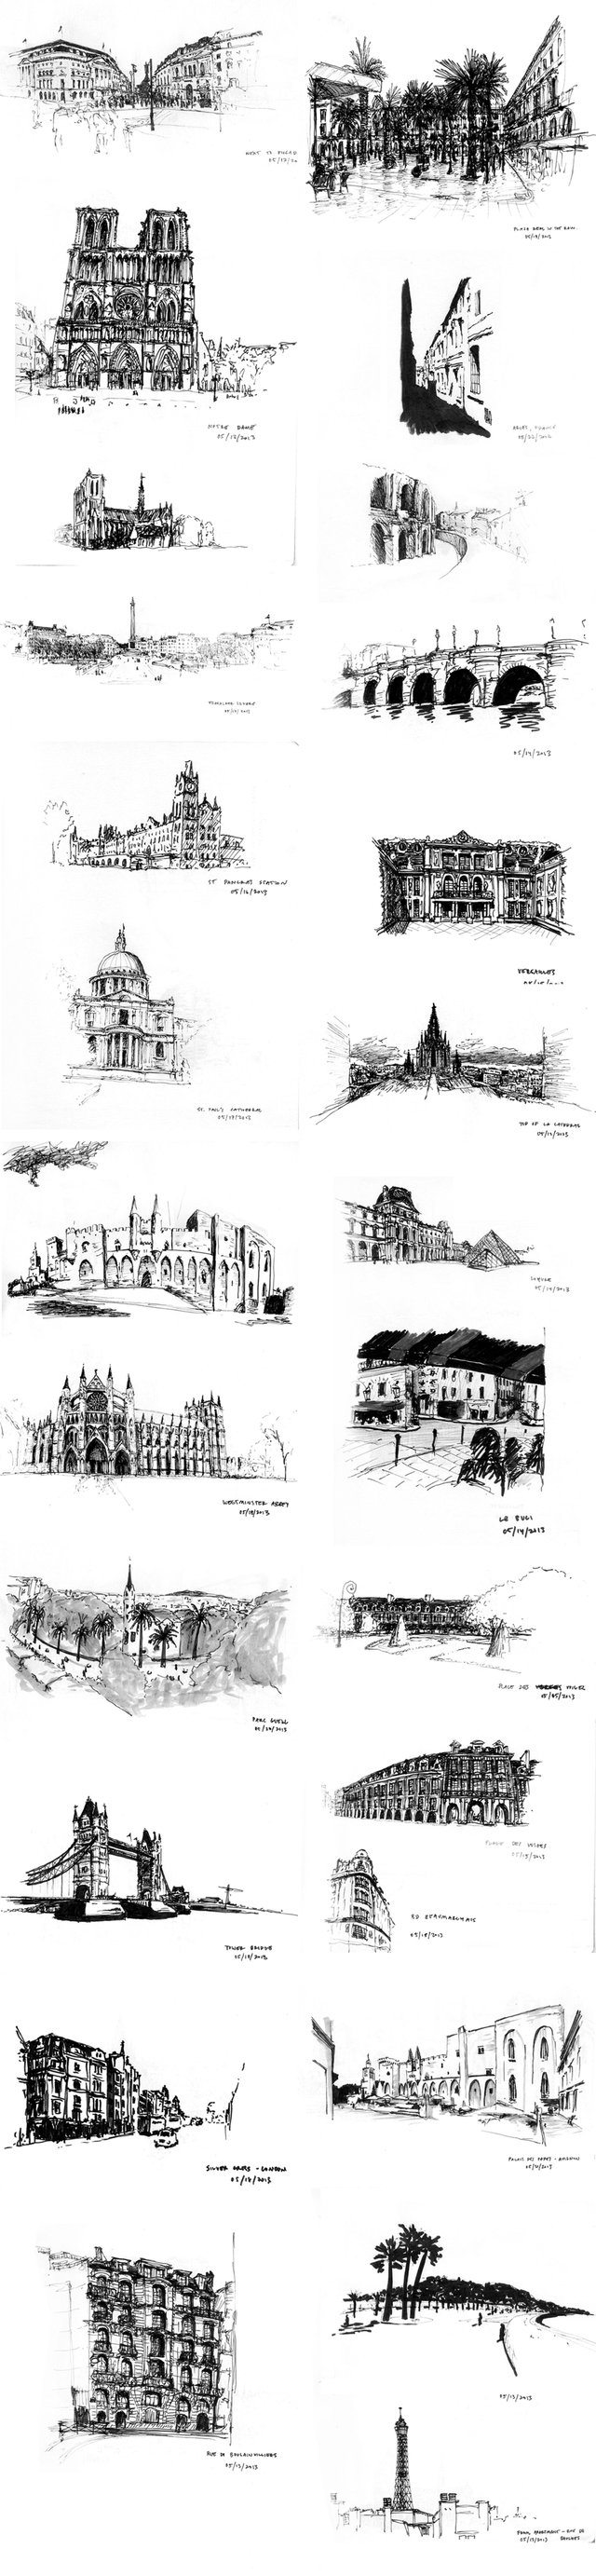 all-sketches-europe.jpg